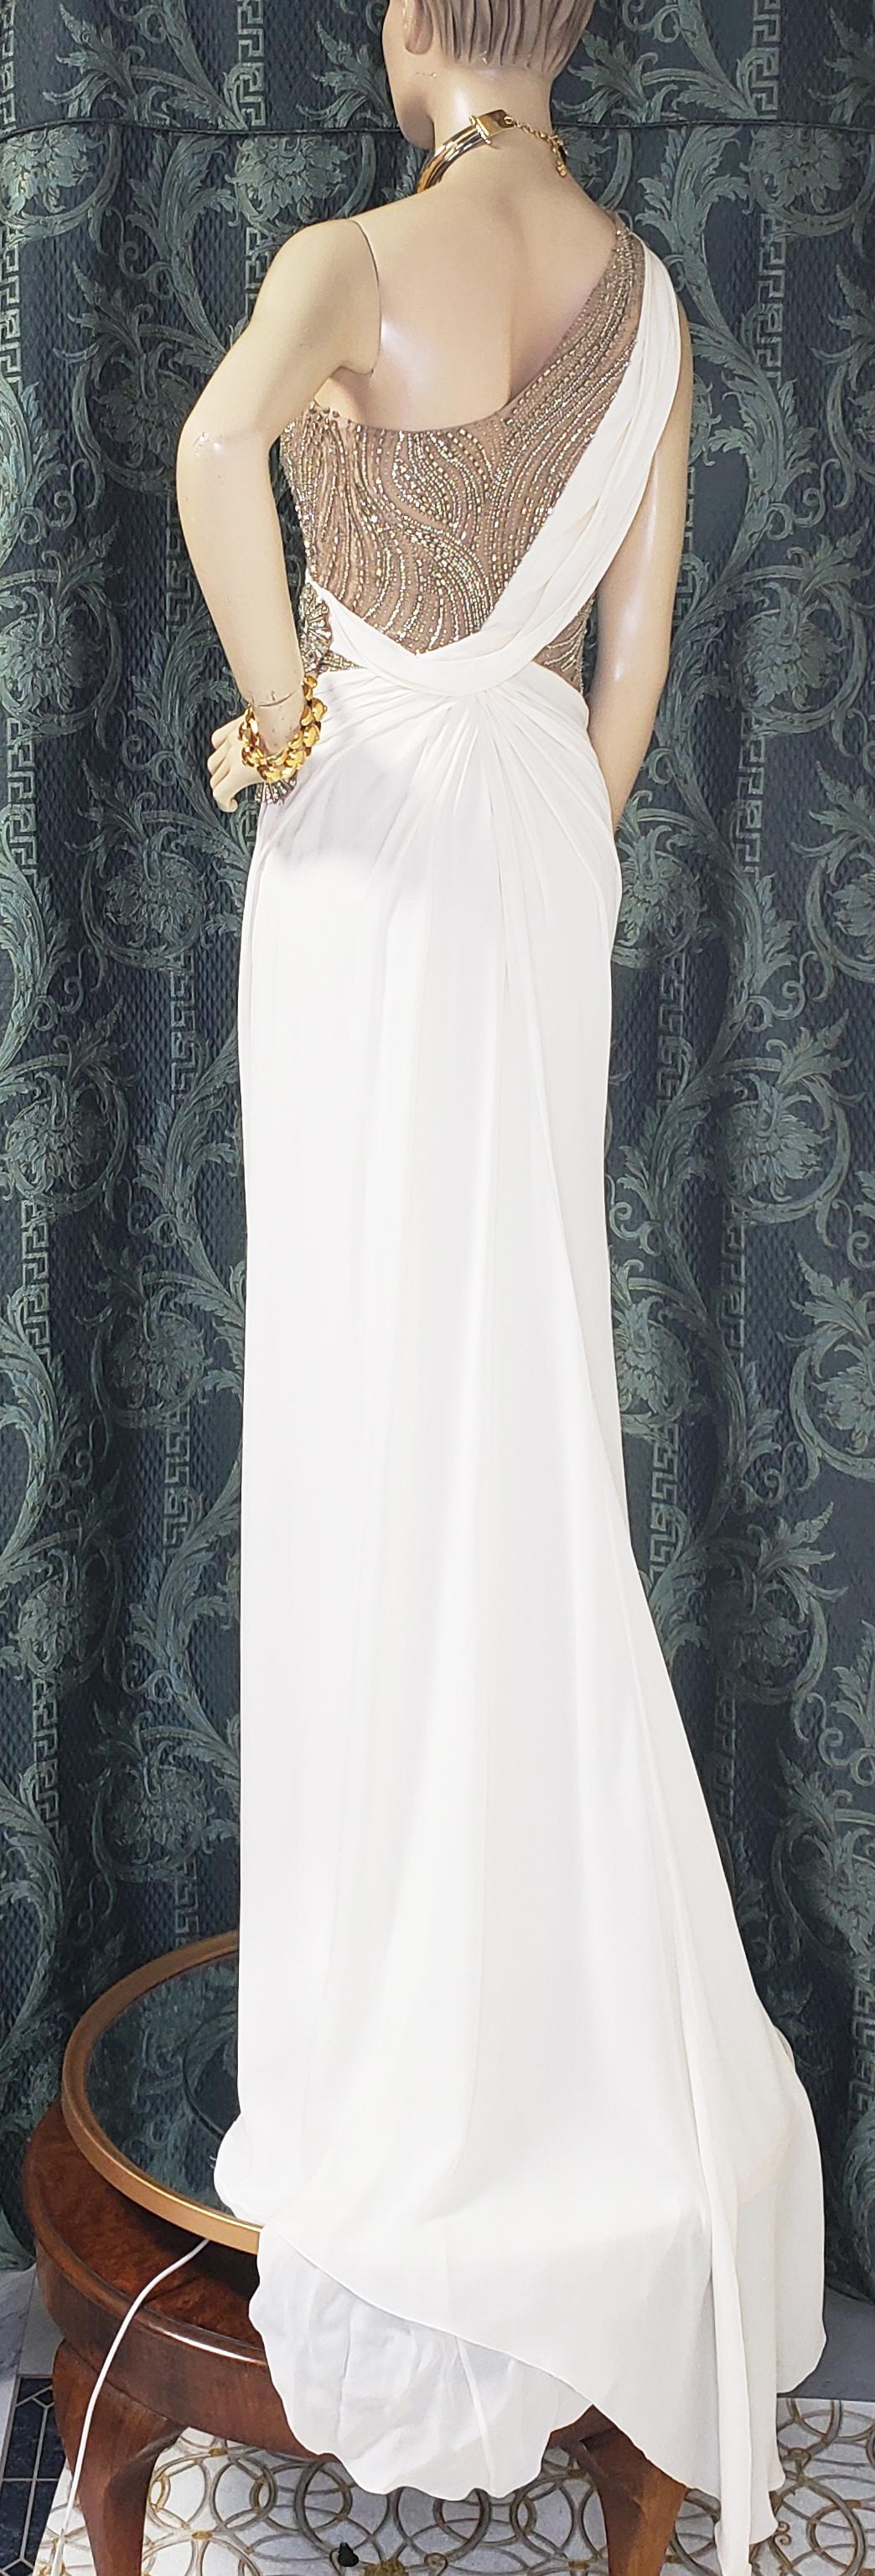 VERSACE CRYSTAL EMBELLISHED WHITE SILK GOWN DRESS Sz IT 42 1